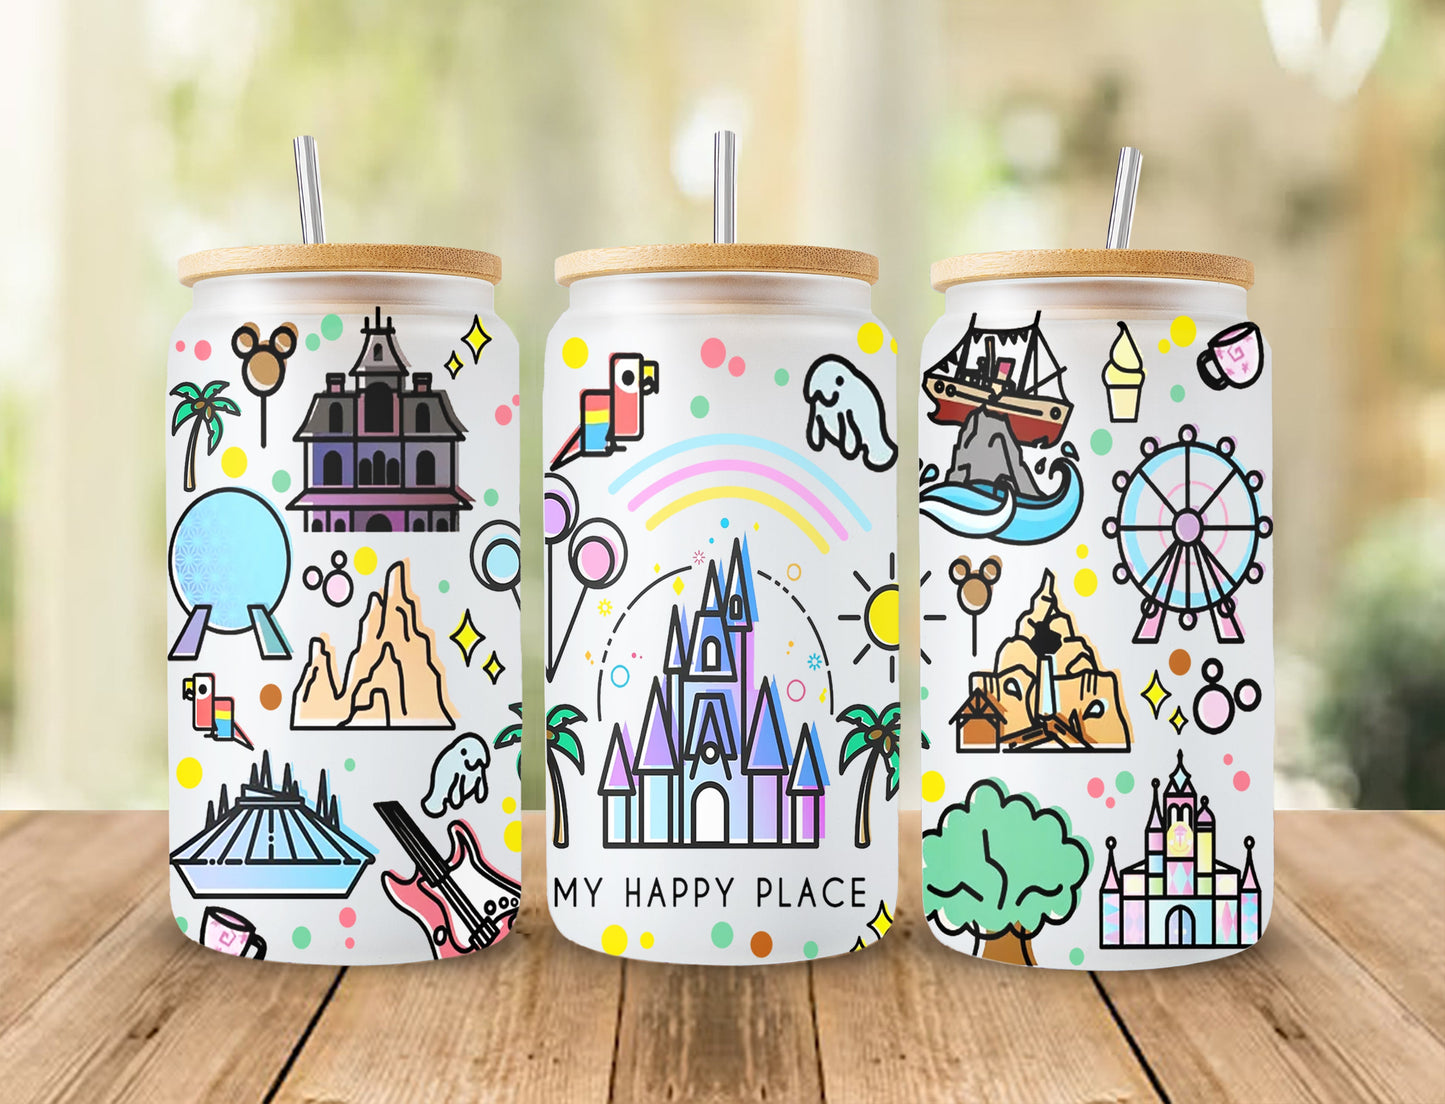 Magic Castle Tumbler Wrap, 16oz Libbey Can Glass, Cartoon tumbler wrap, magic kingdom, magic can glass,happiest place can glass,Png download - VartDigitals